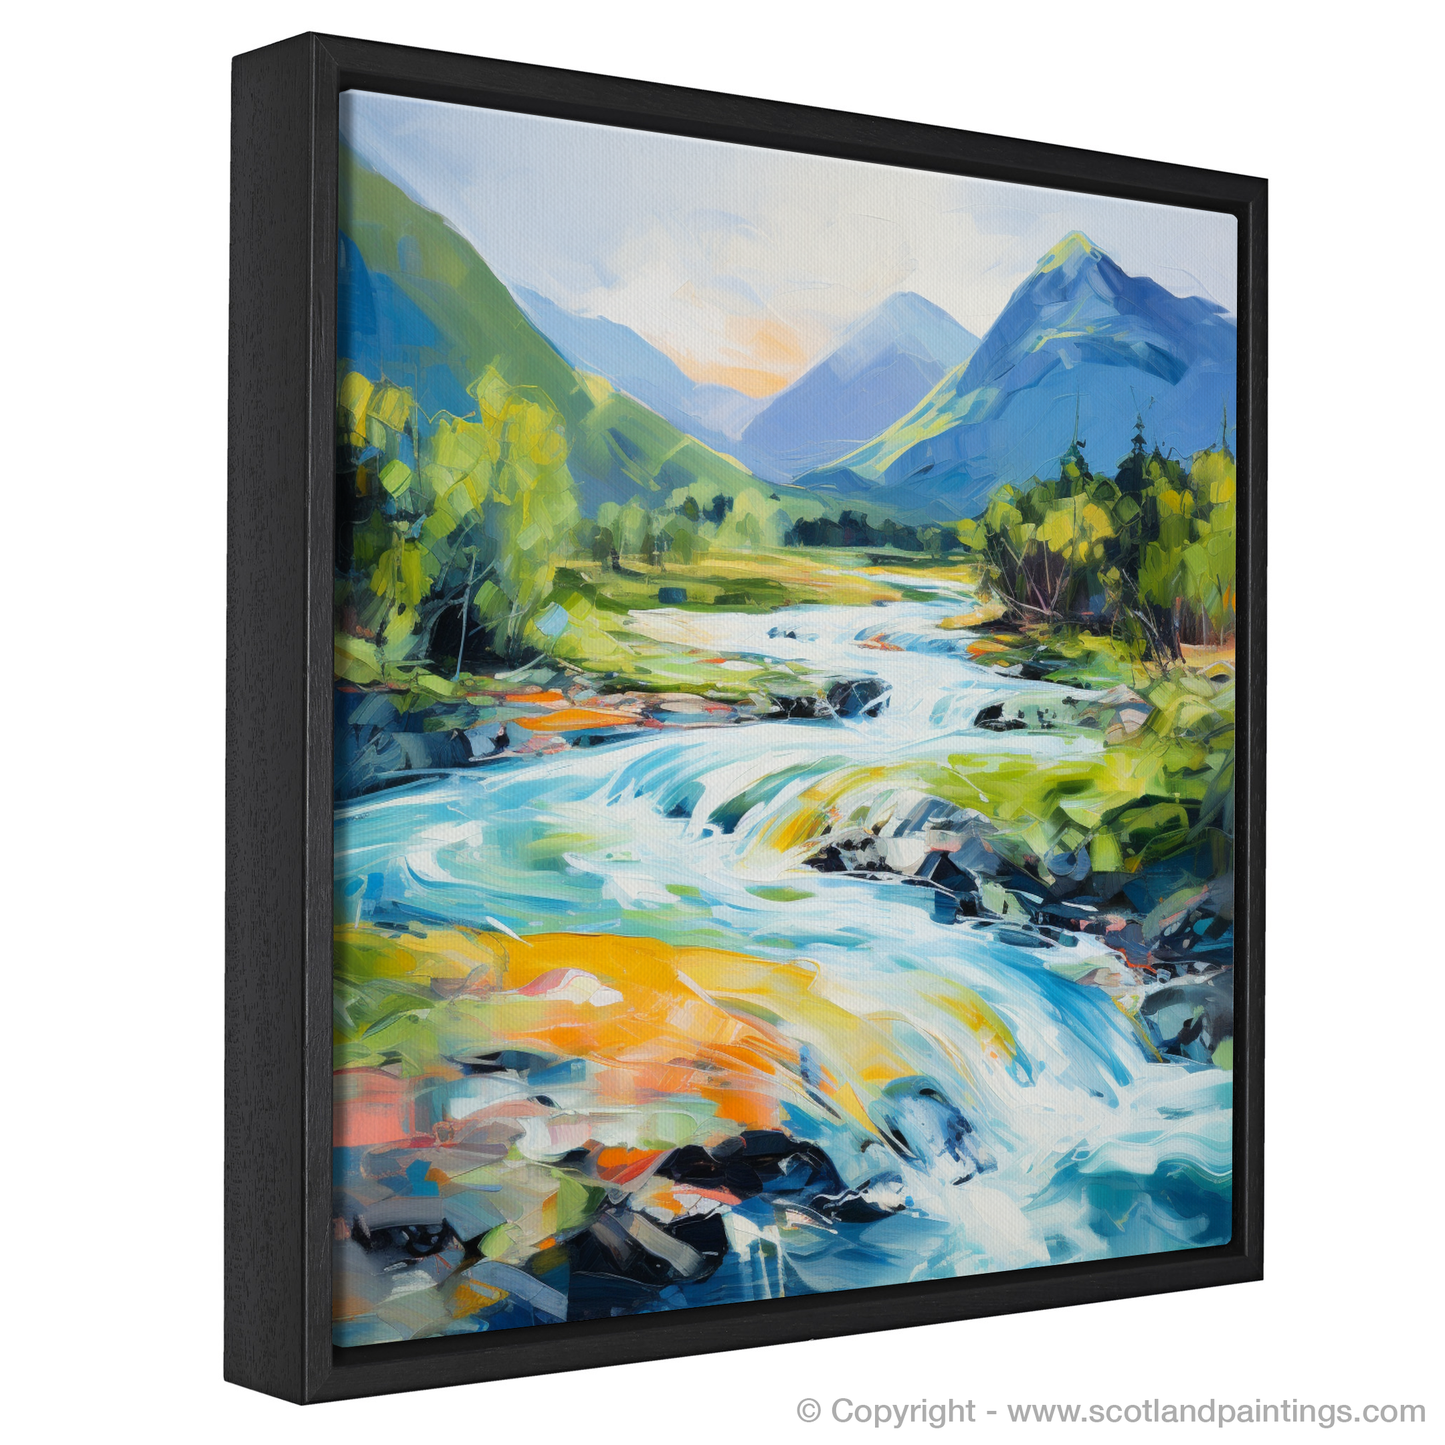 Painting and Art Print of River Etive, Argyll and Bute in summer entitled "Summer Energy at River Etive: A Modern Scottish Reverie".